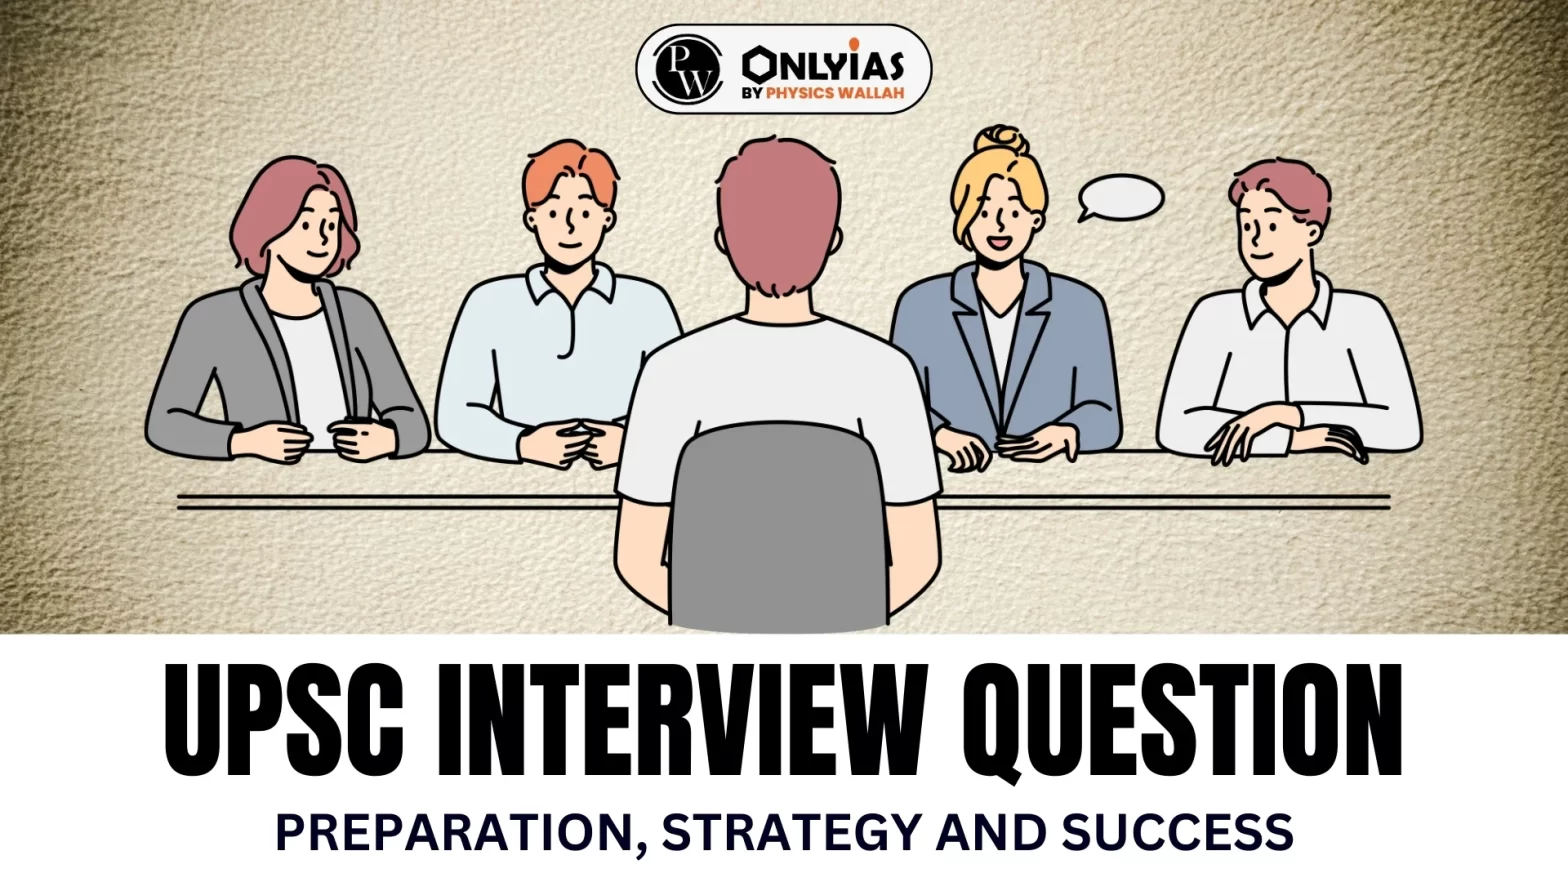 UPSC Interview Question: Preparation, Strategy and Success